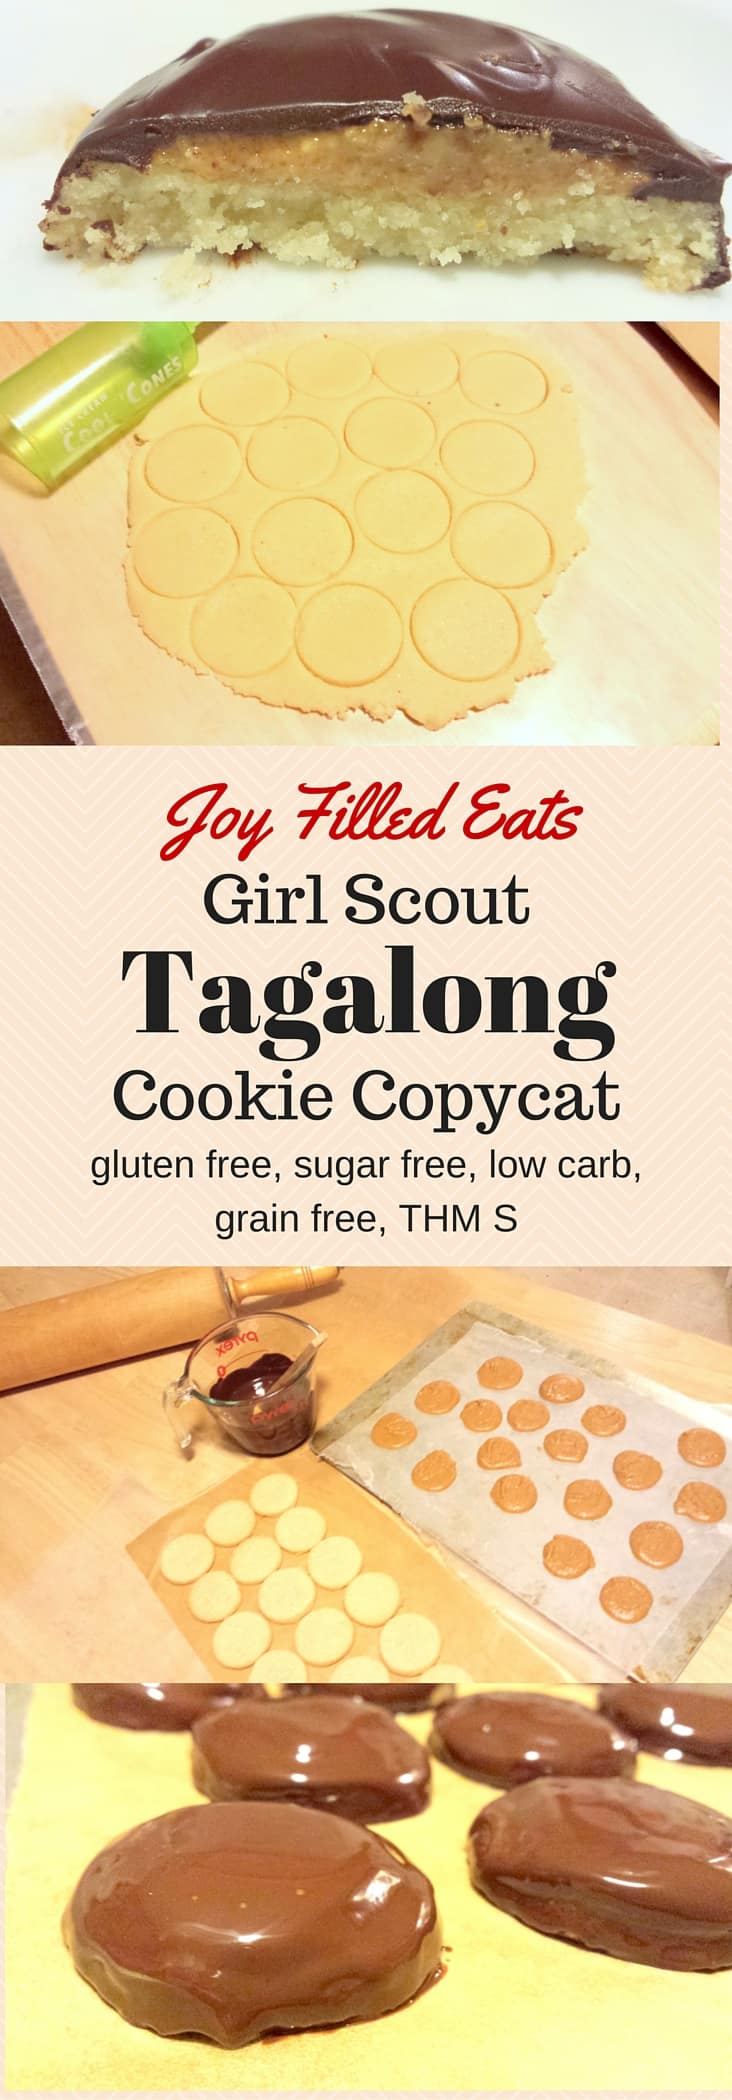 pinterest image for copycat tagalong cookies